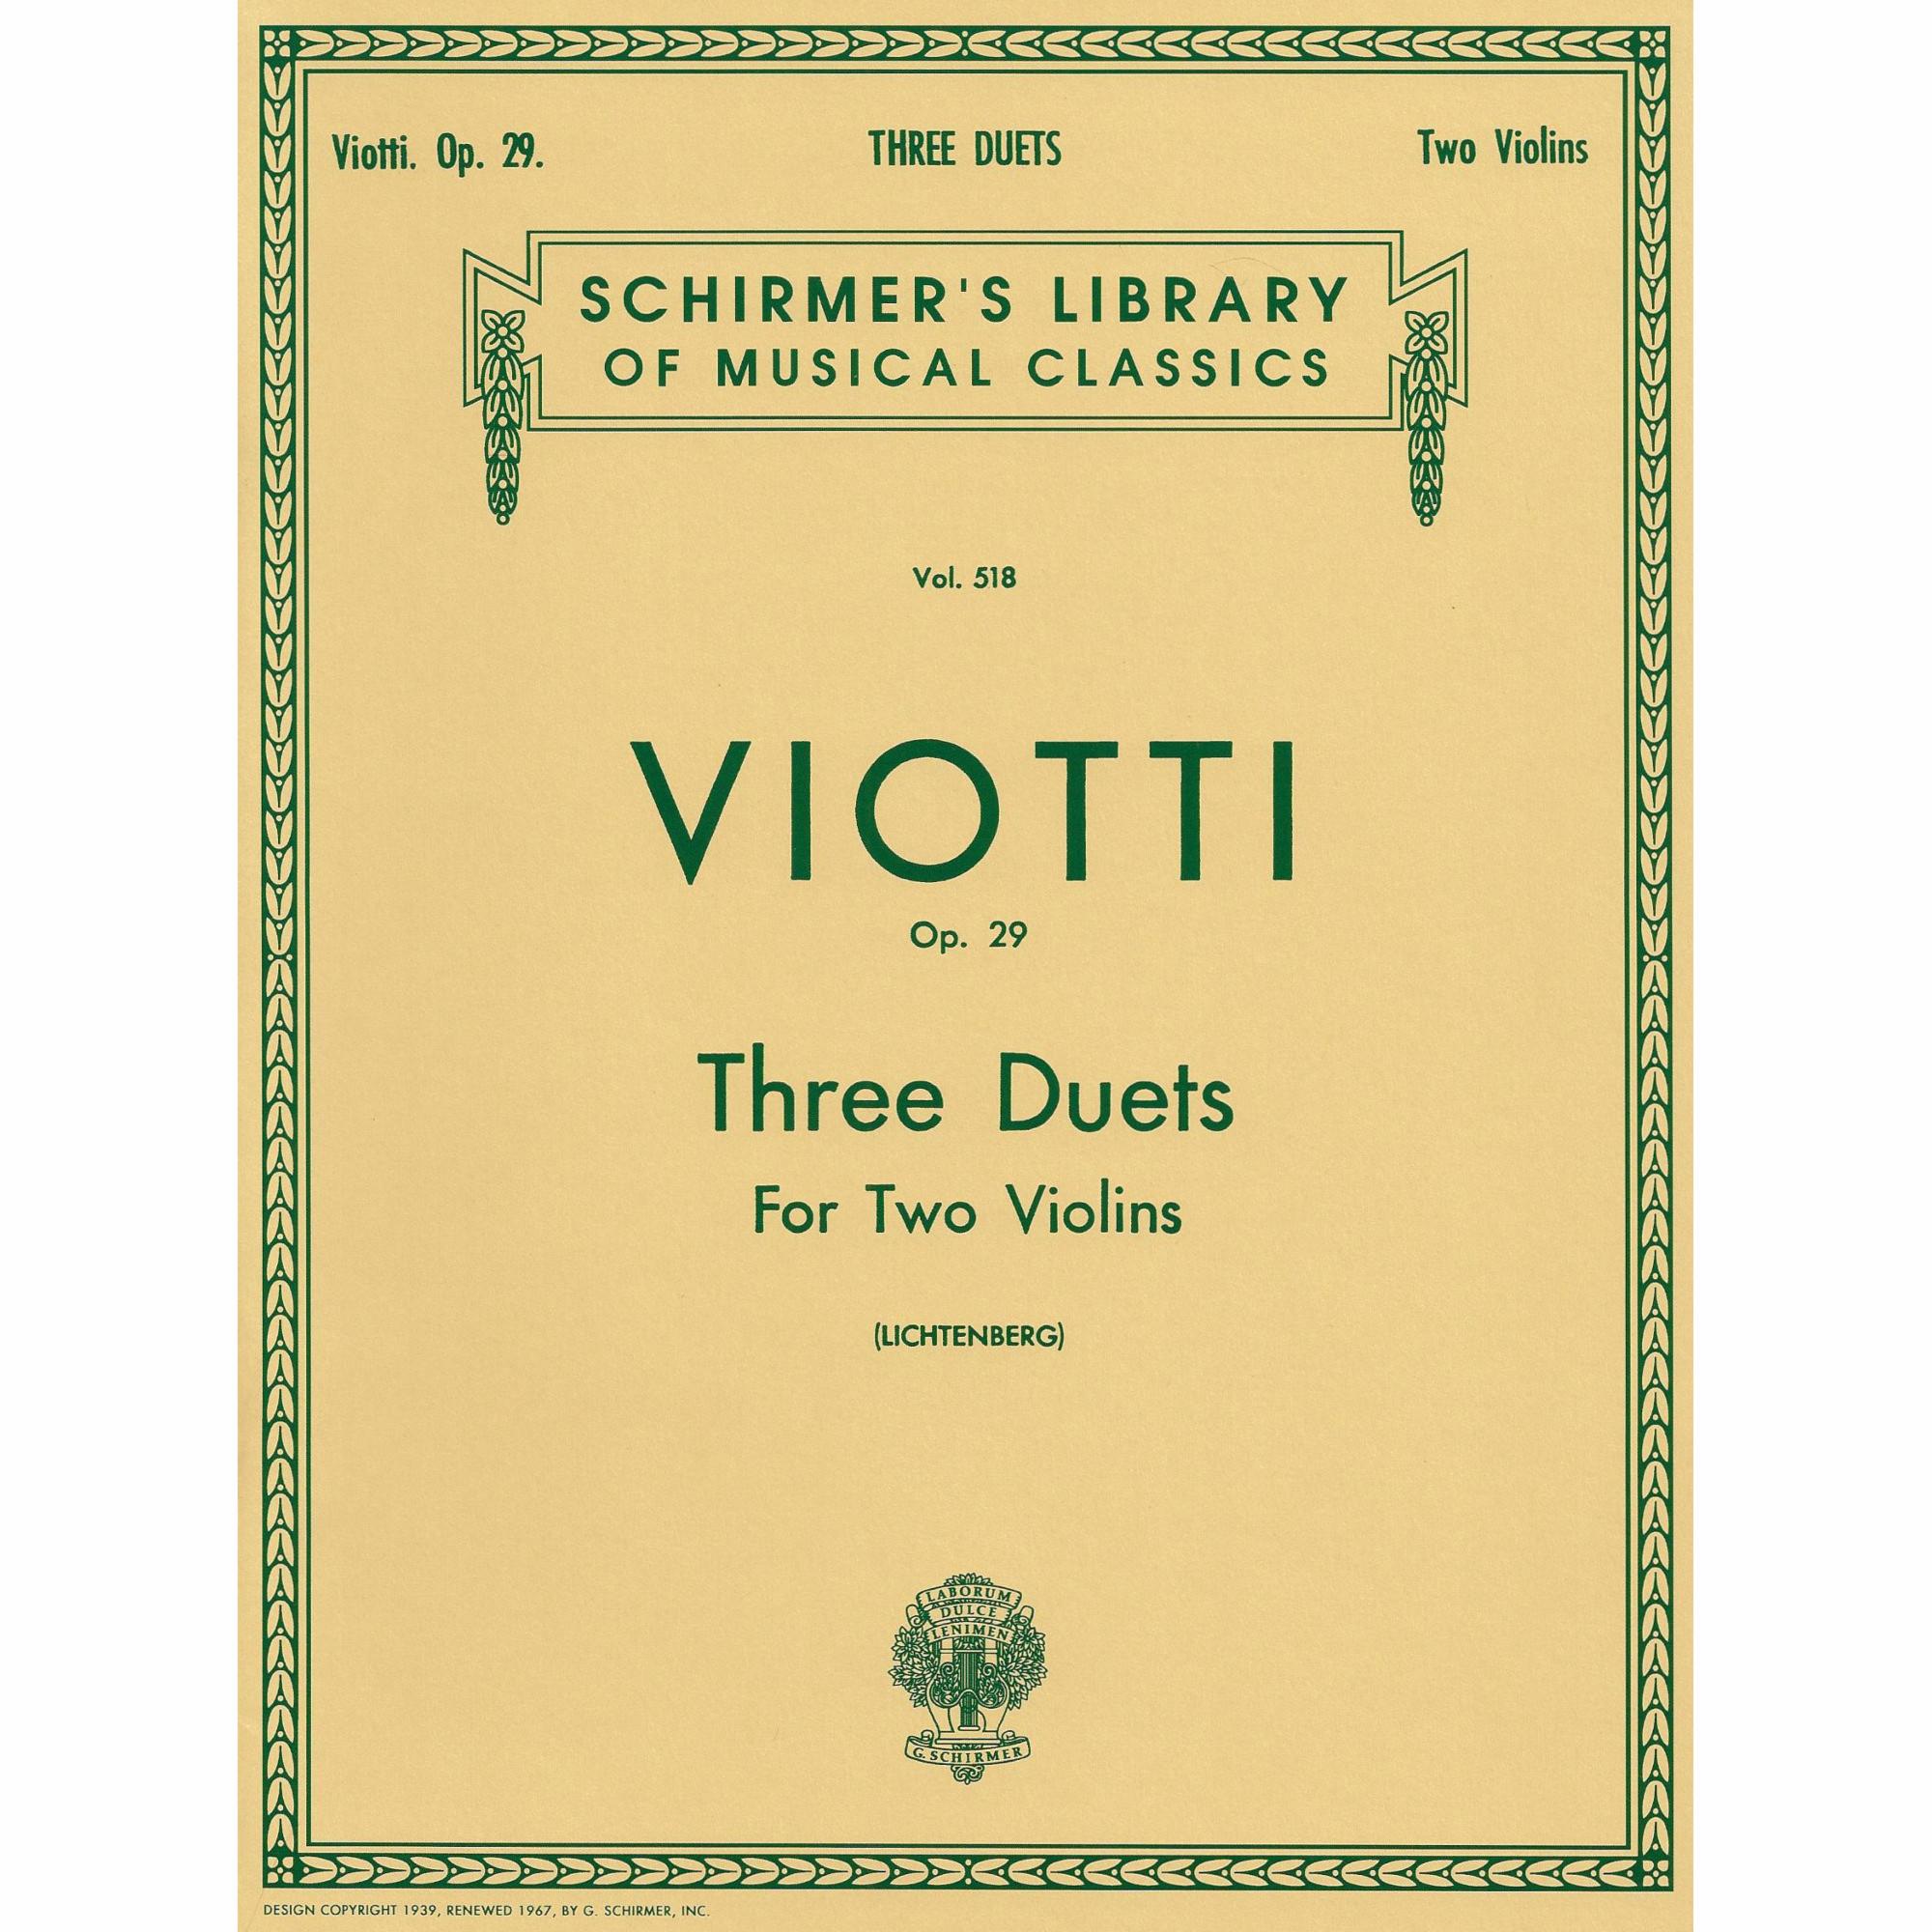 Viotti -- Three Duets, Op. 29 for Two Violins